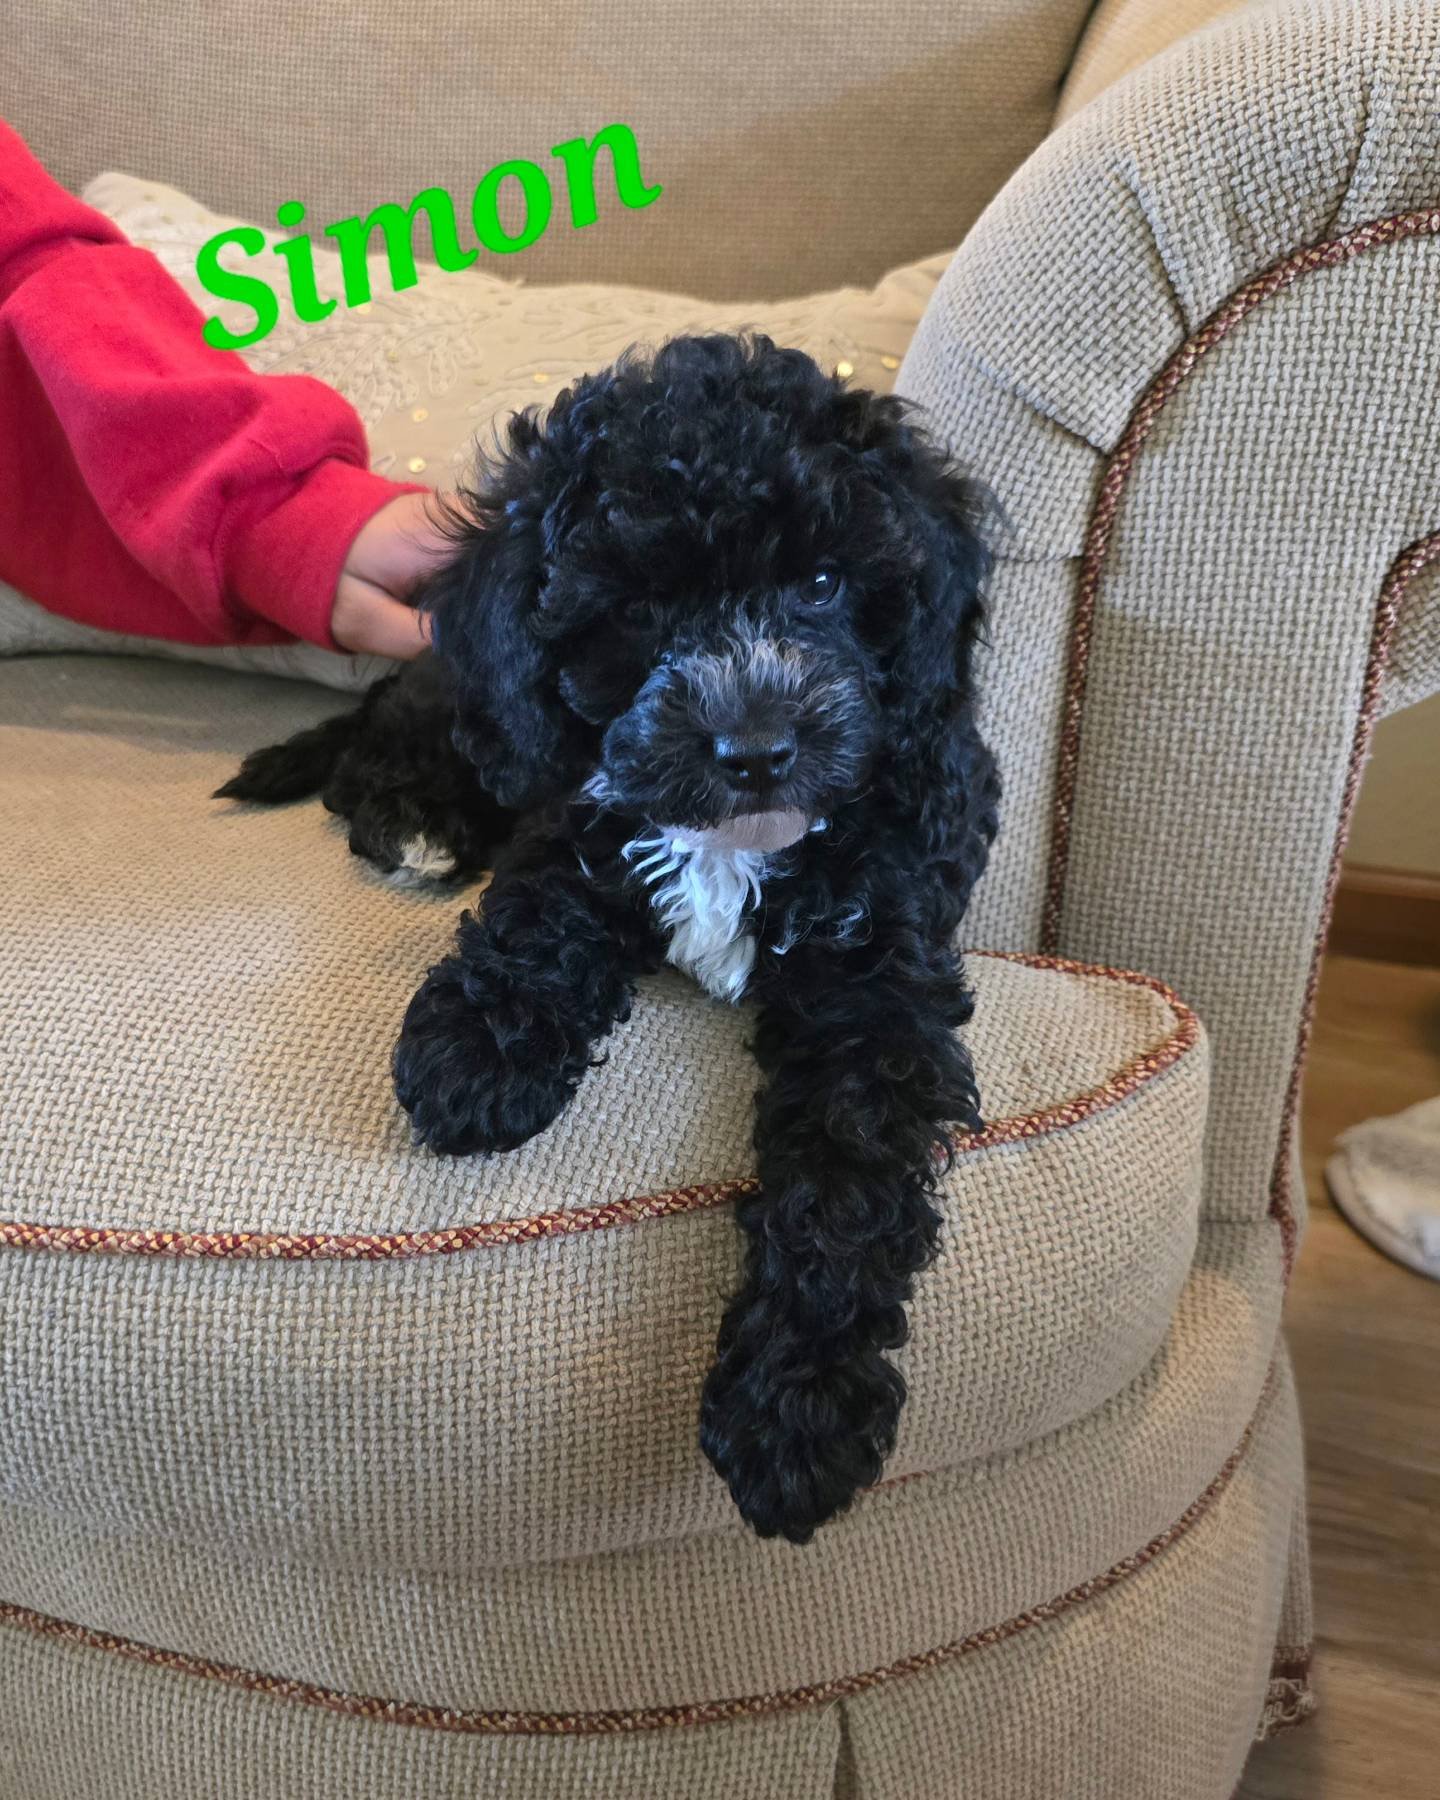 Looking for Forever Families! 🥰

#Australianlabradoodle #Baysidelabradoodles #adoptapuppy #instapuppy #doodlesofinstagram #doodles #instadog #bark ##australianlabradoodlesofinstagram